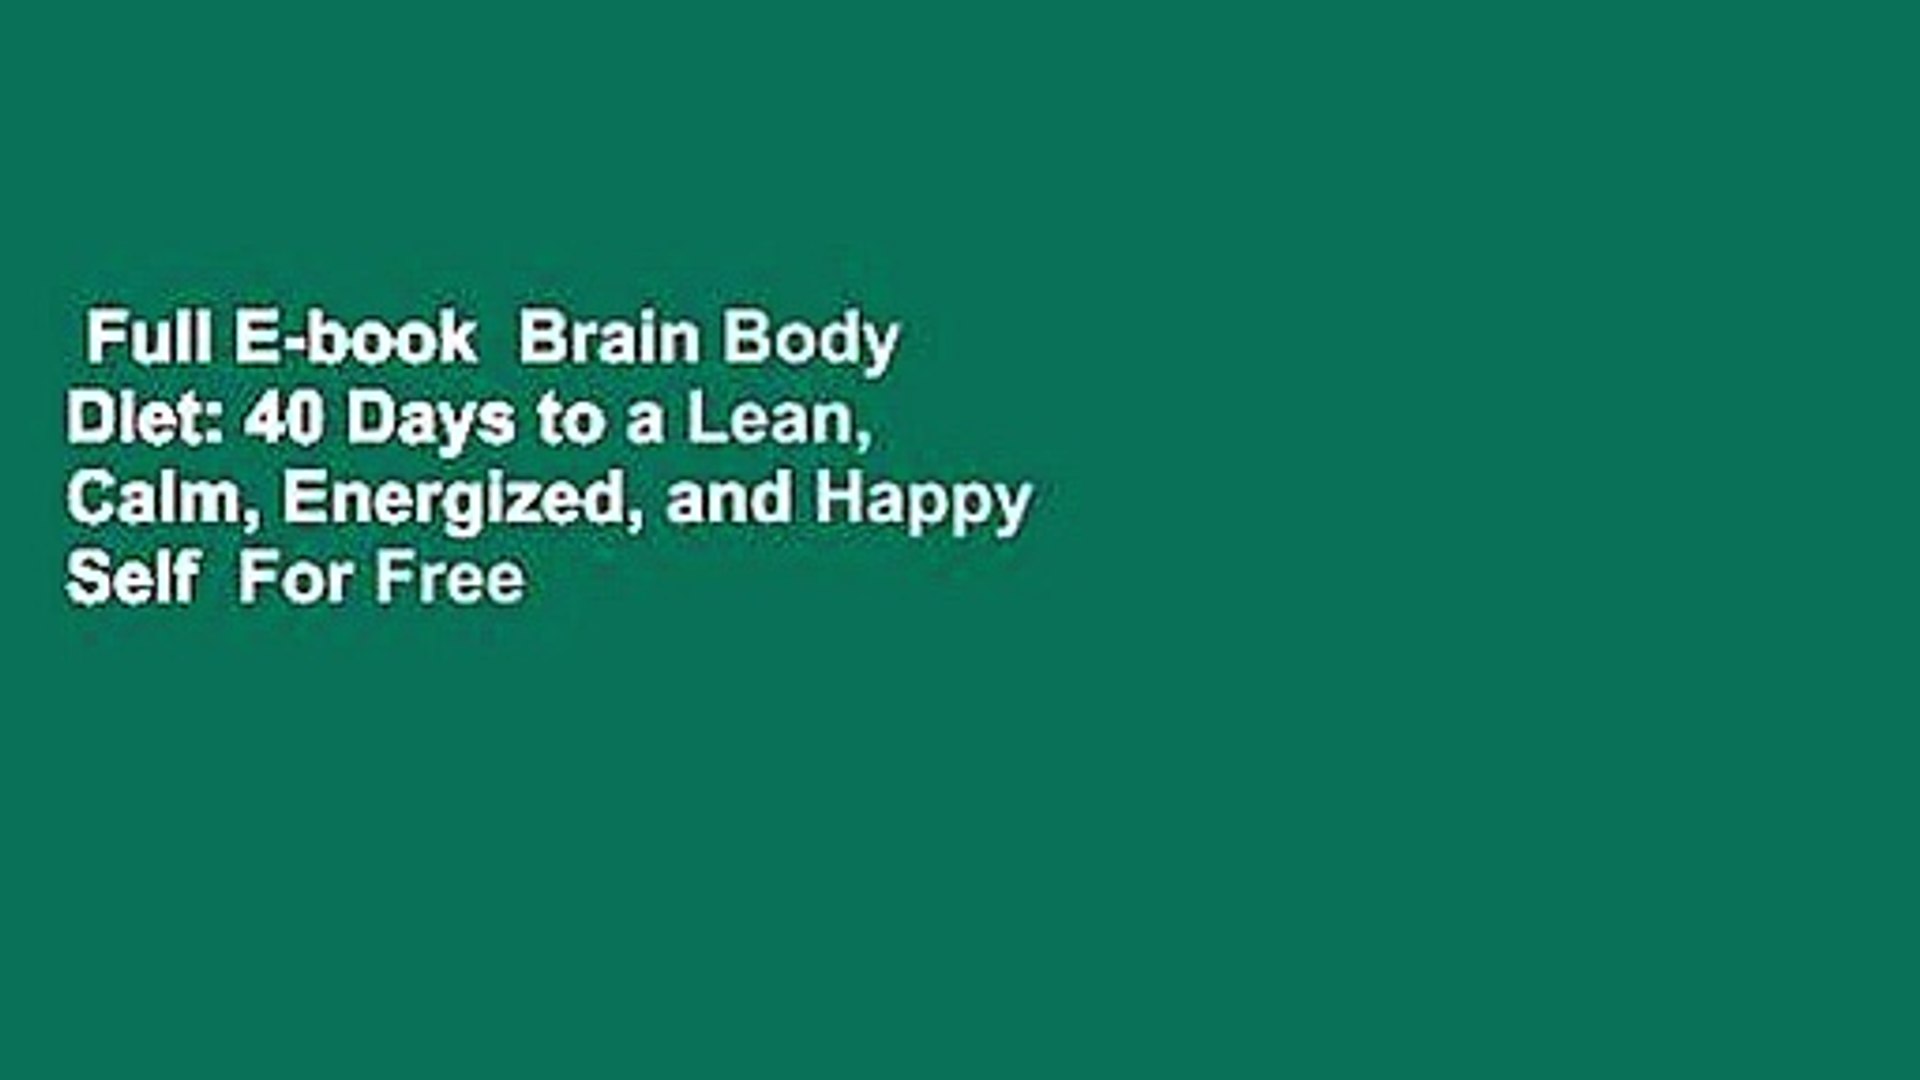 Full E-book  Brain Body Diet: 40 Days to a Lean, Calm, Energized, and Happy Self  For Free